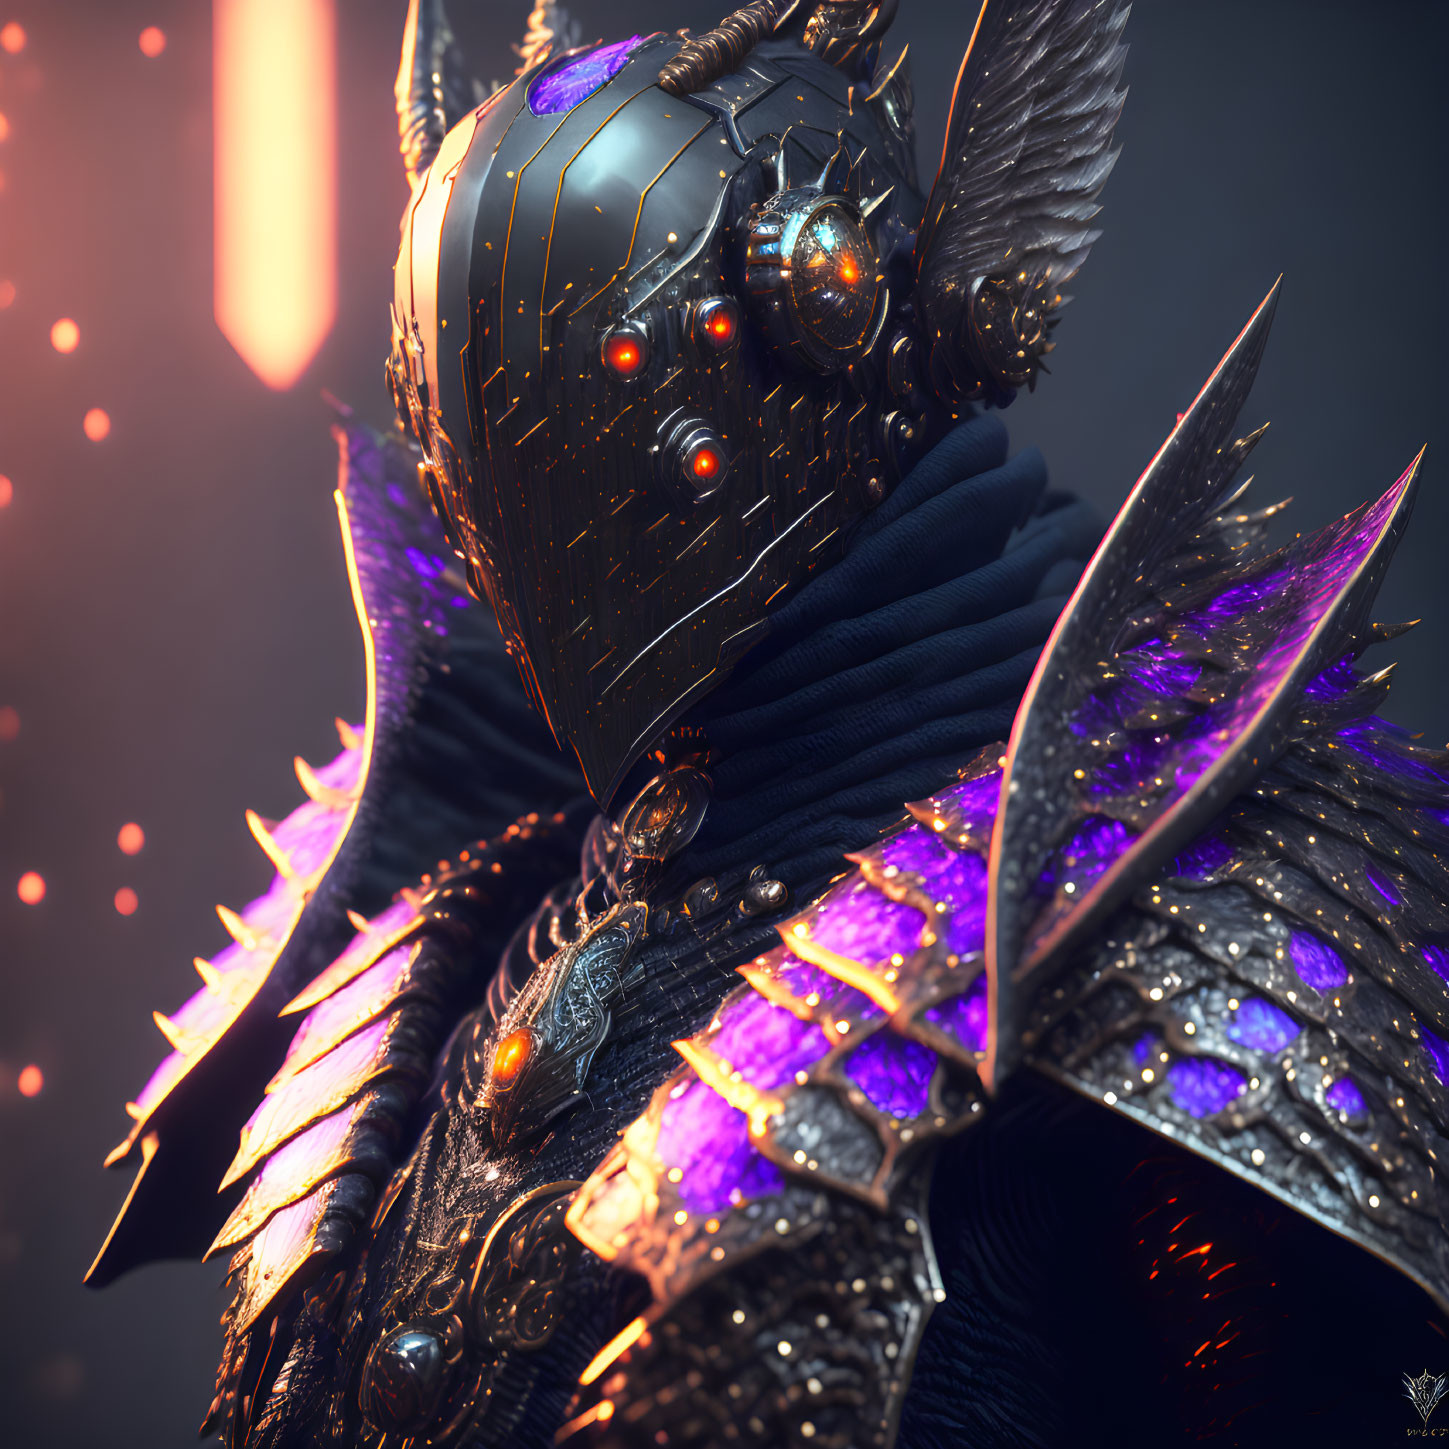 Character with Knight Helmet and Glowing Eyes in Purple Armor